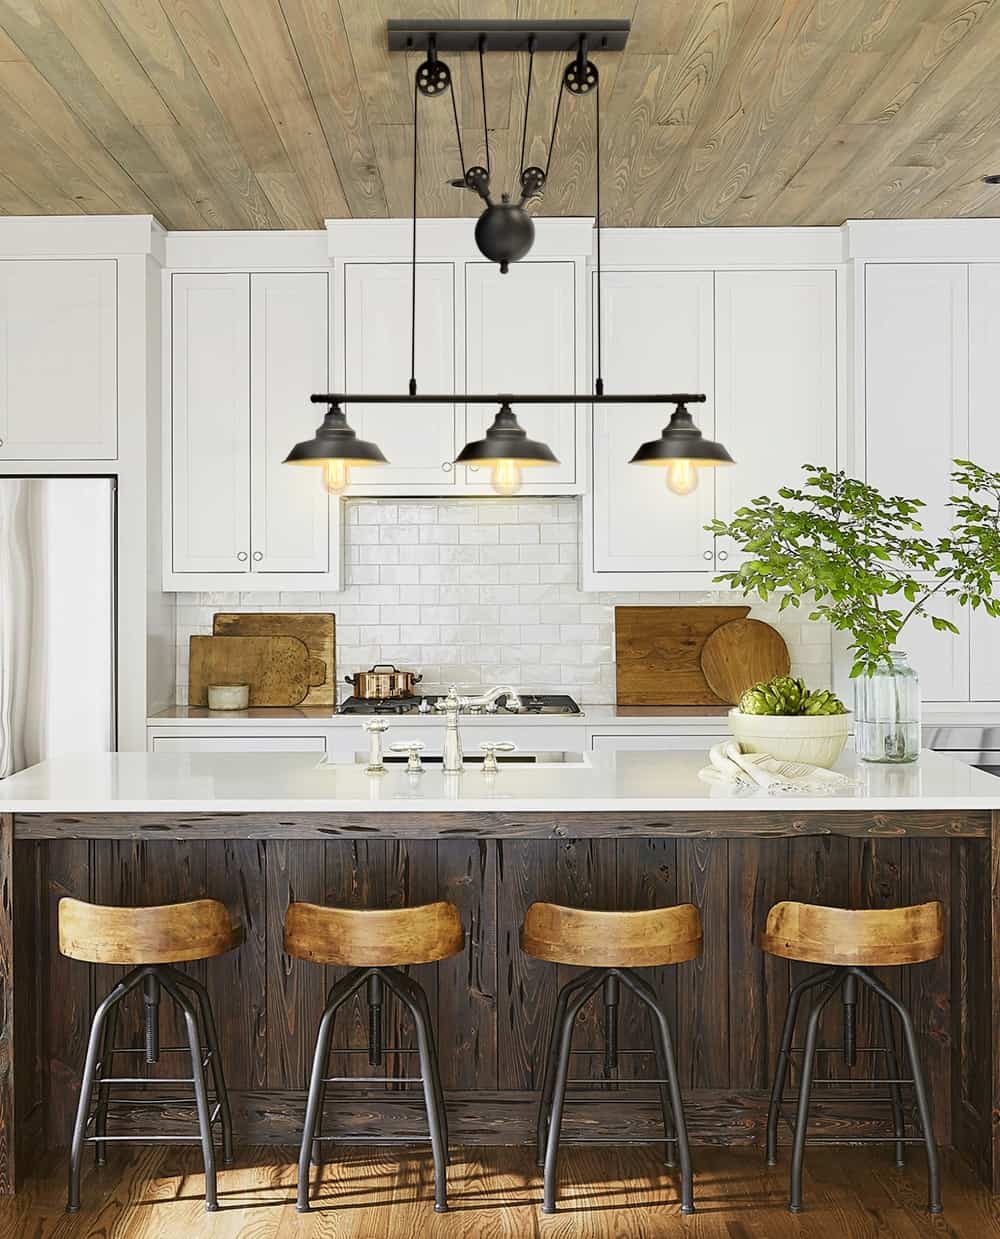 Hang a pendant light or chandelier to add personality and style